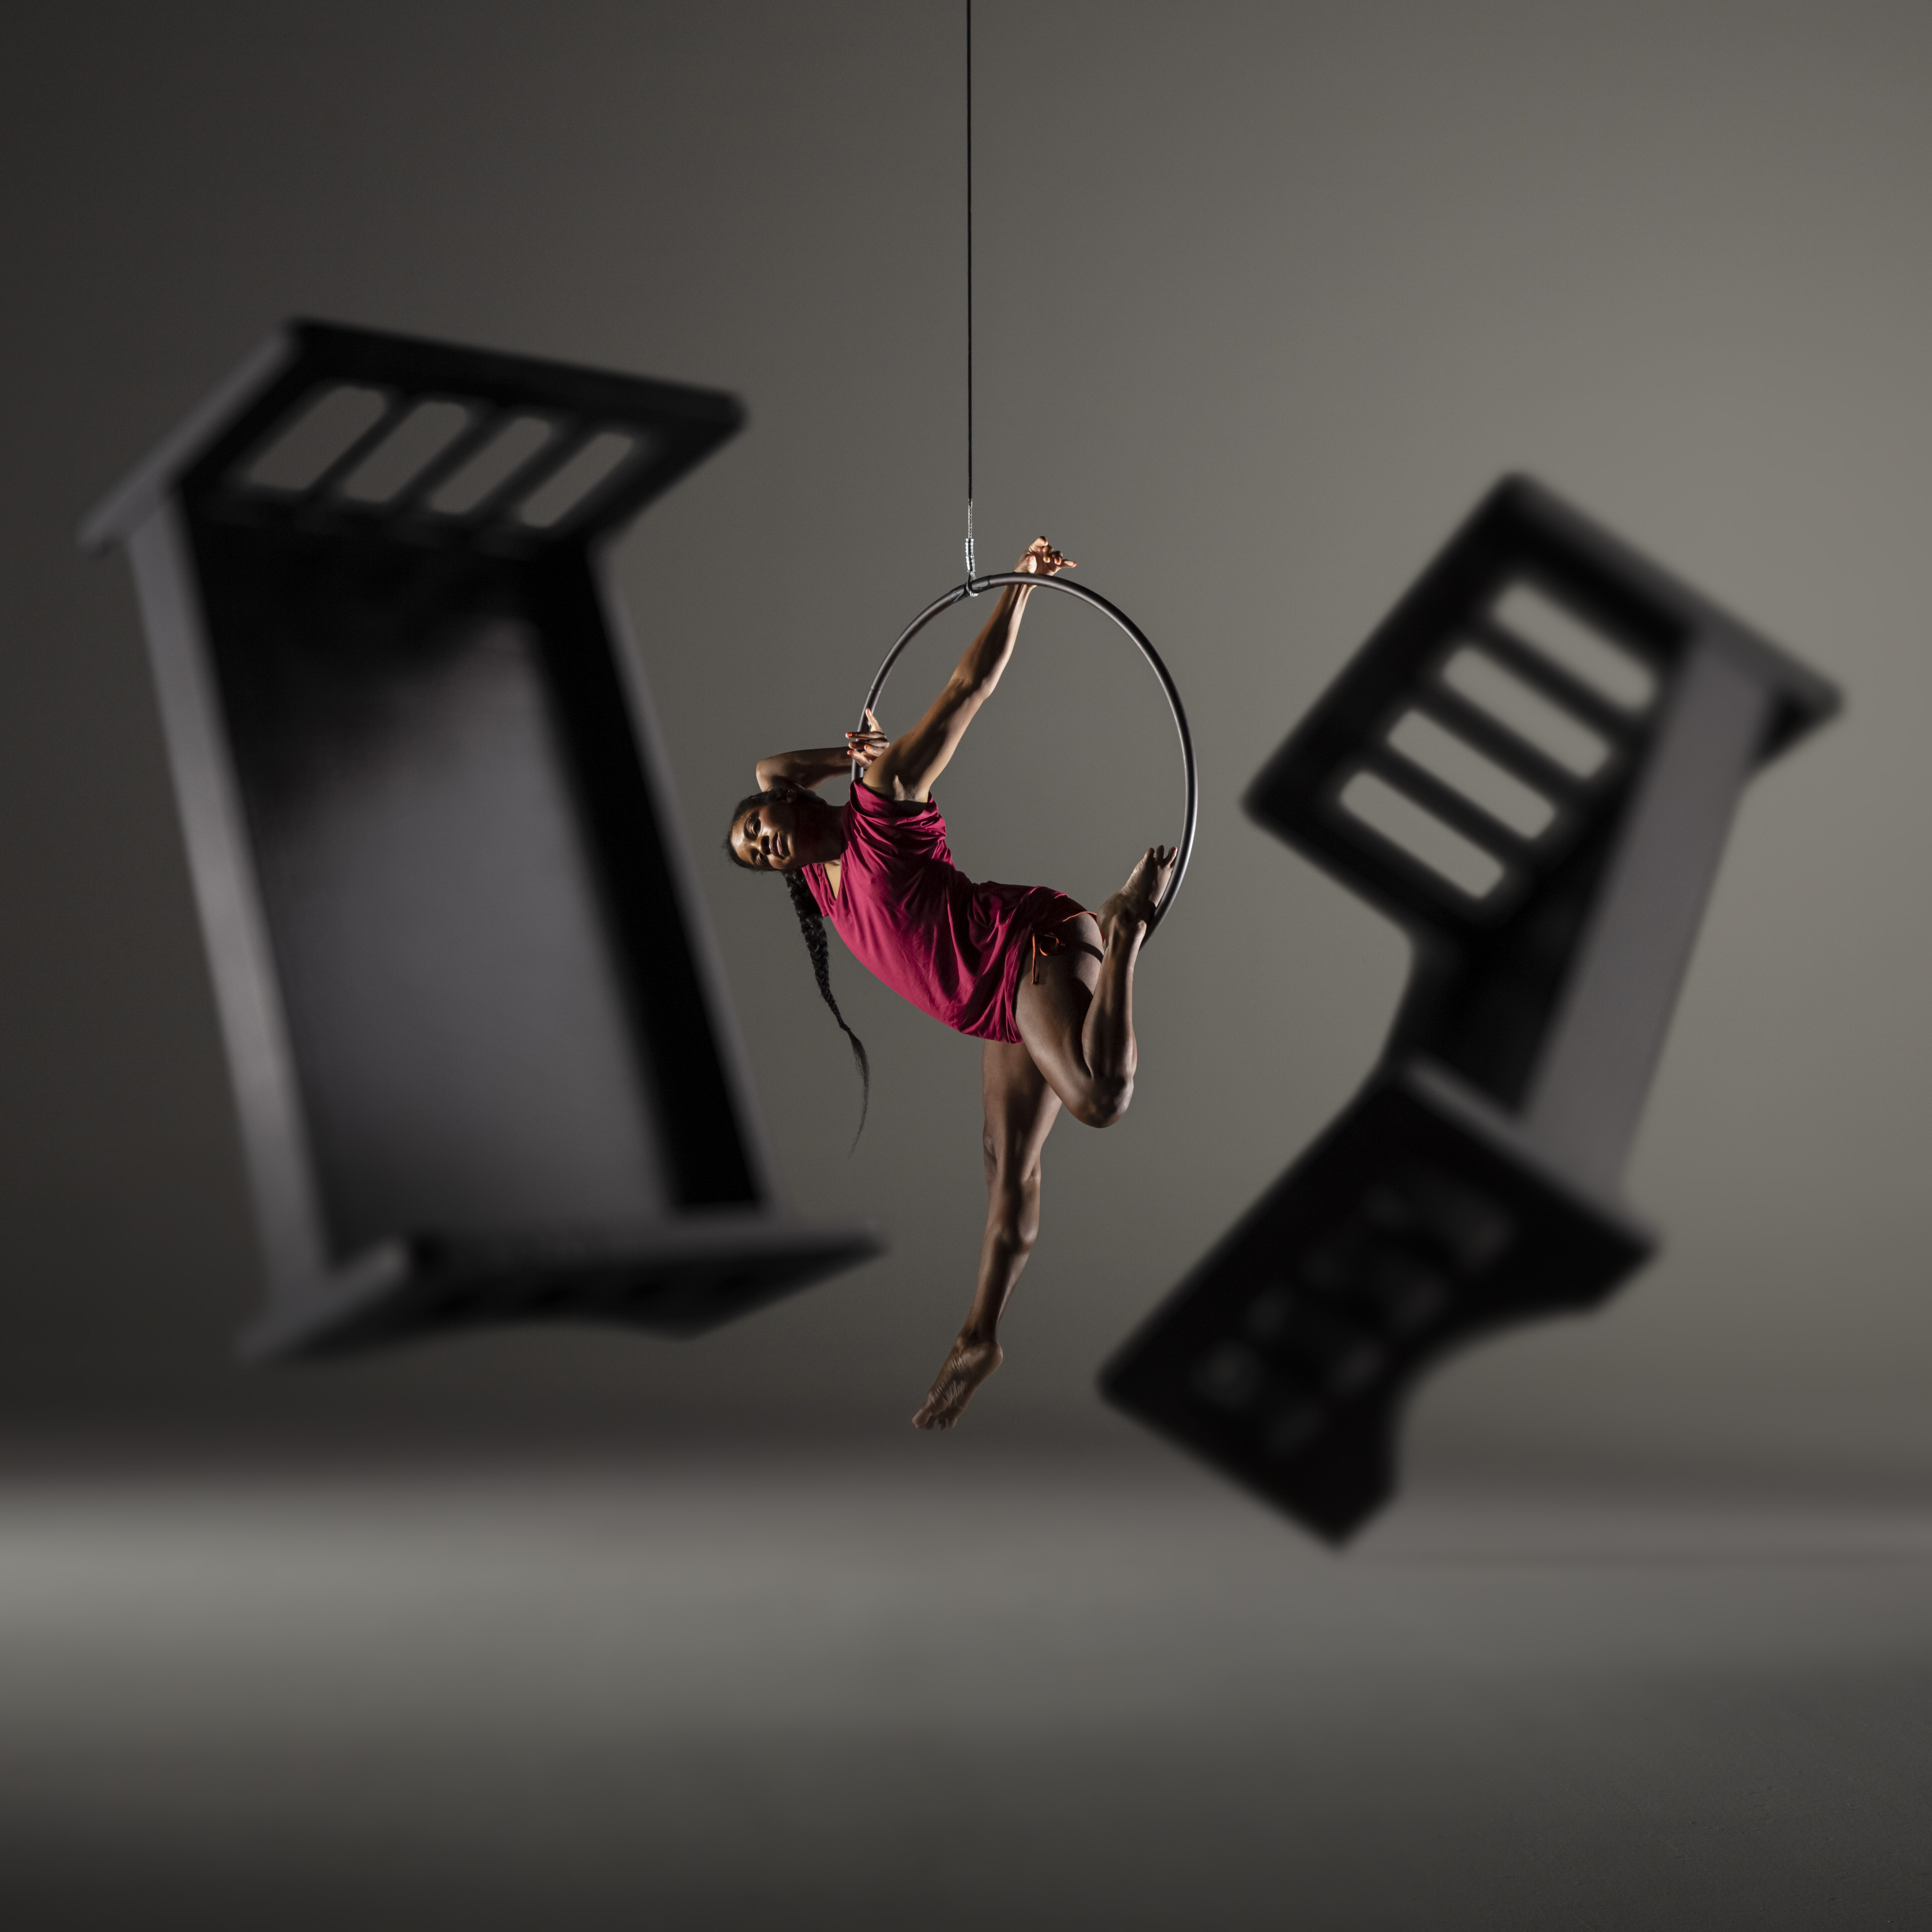 A dancer suspends from a hoop with bed frame shadows behind her